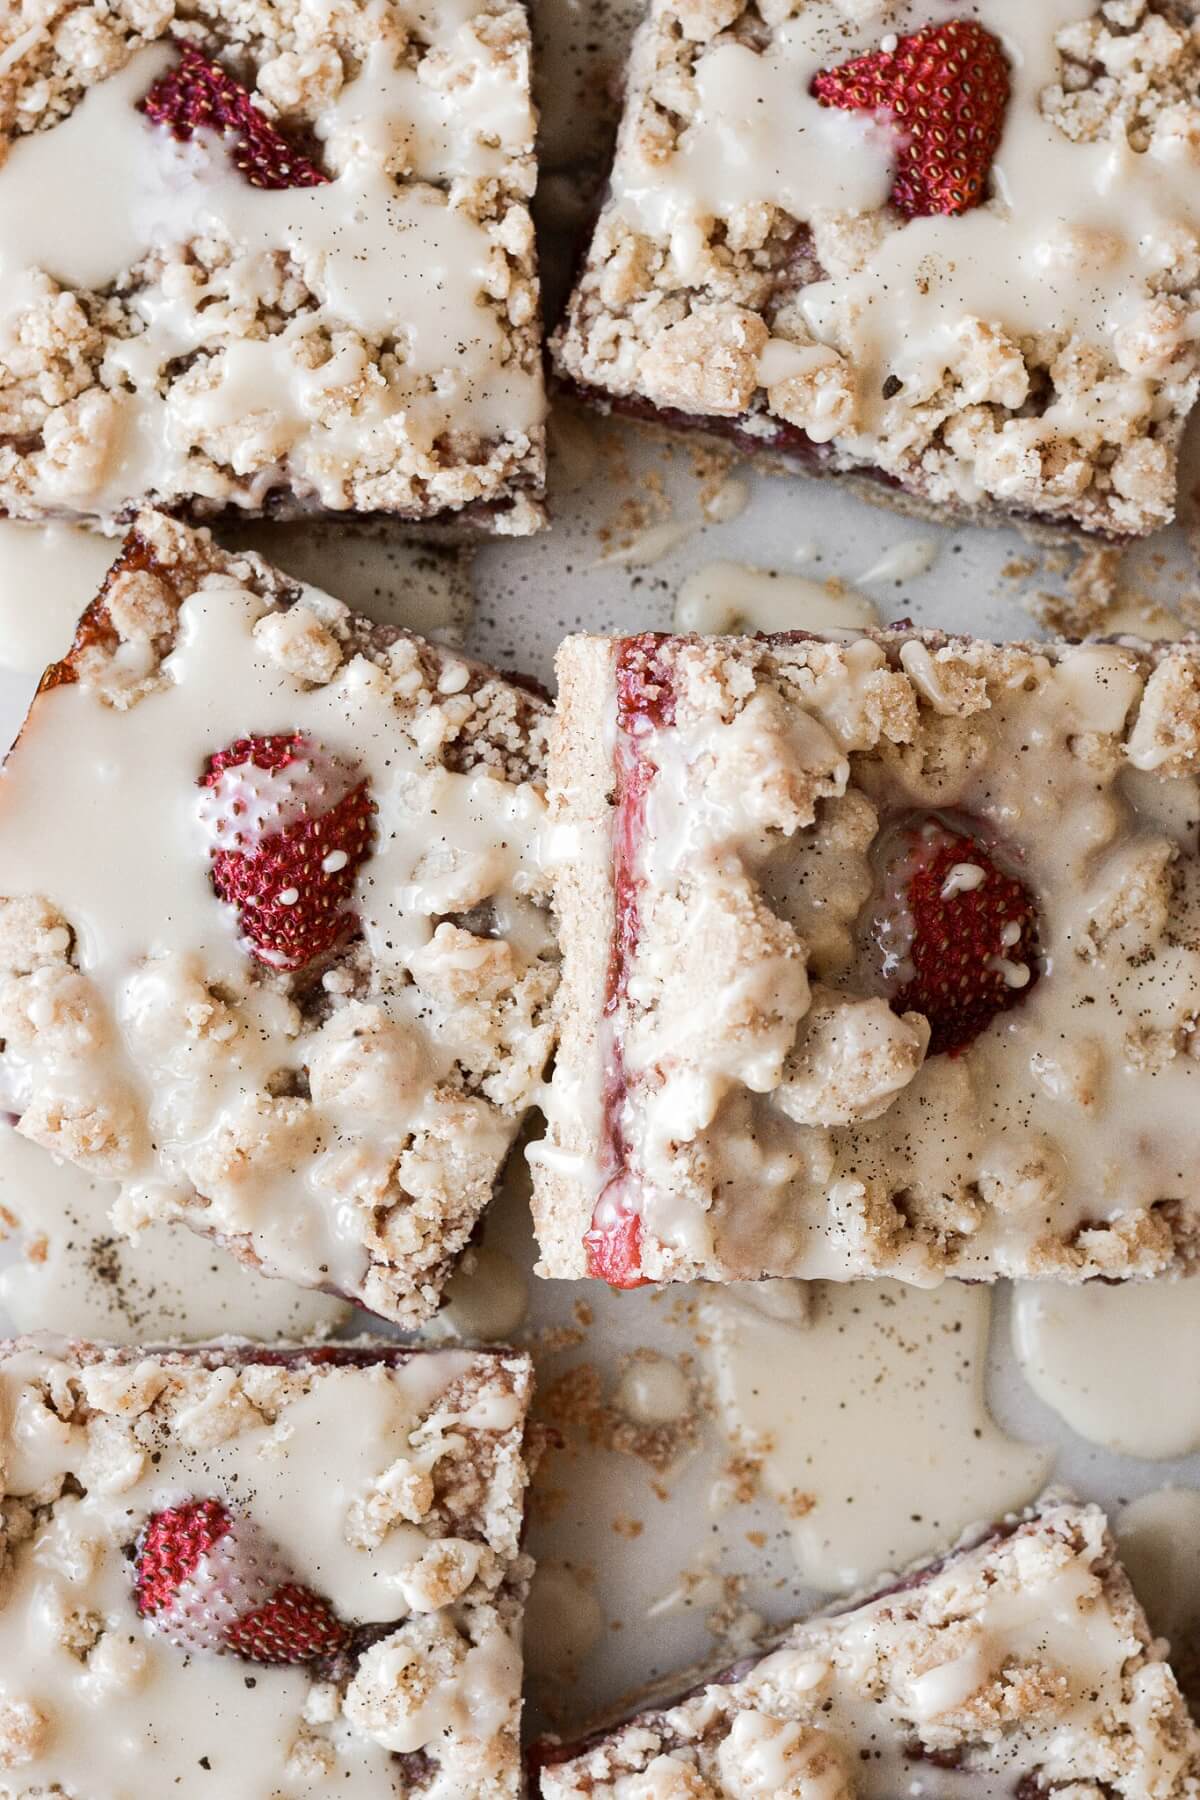 Icing drizzled over strawberry crumb bars.